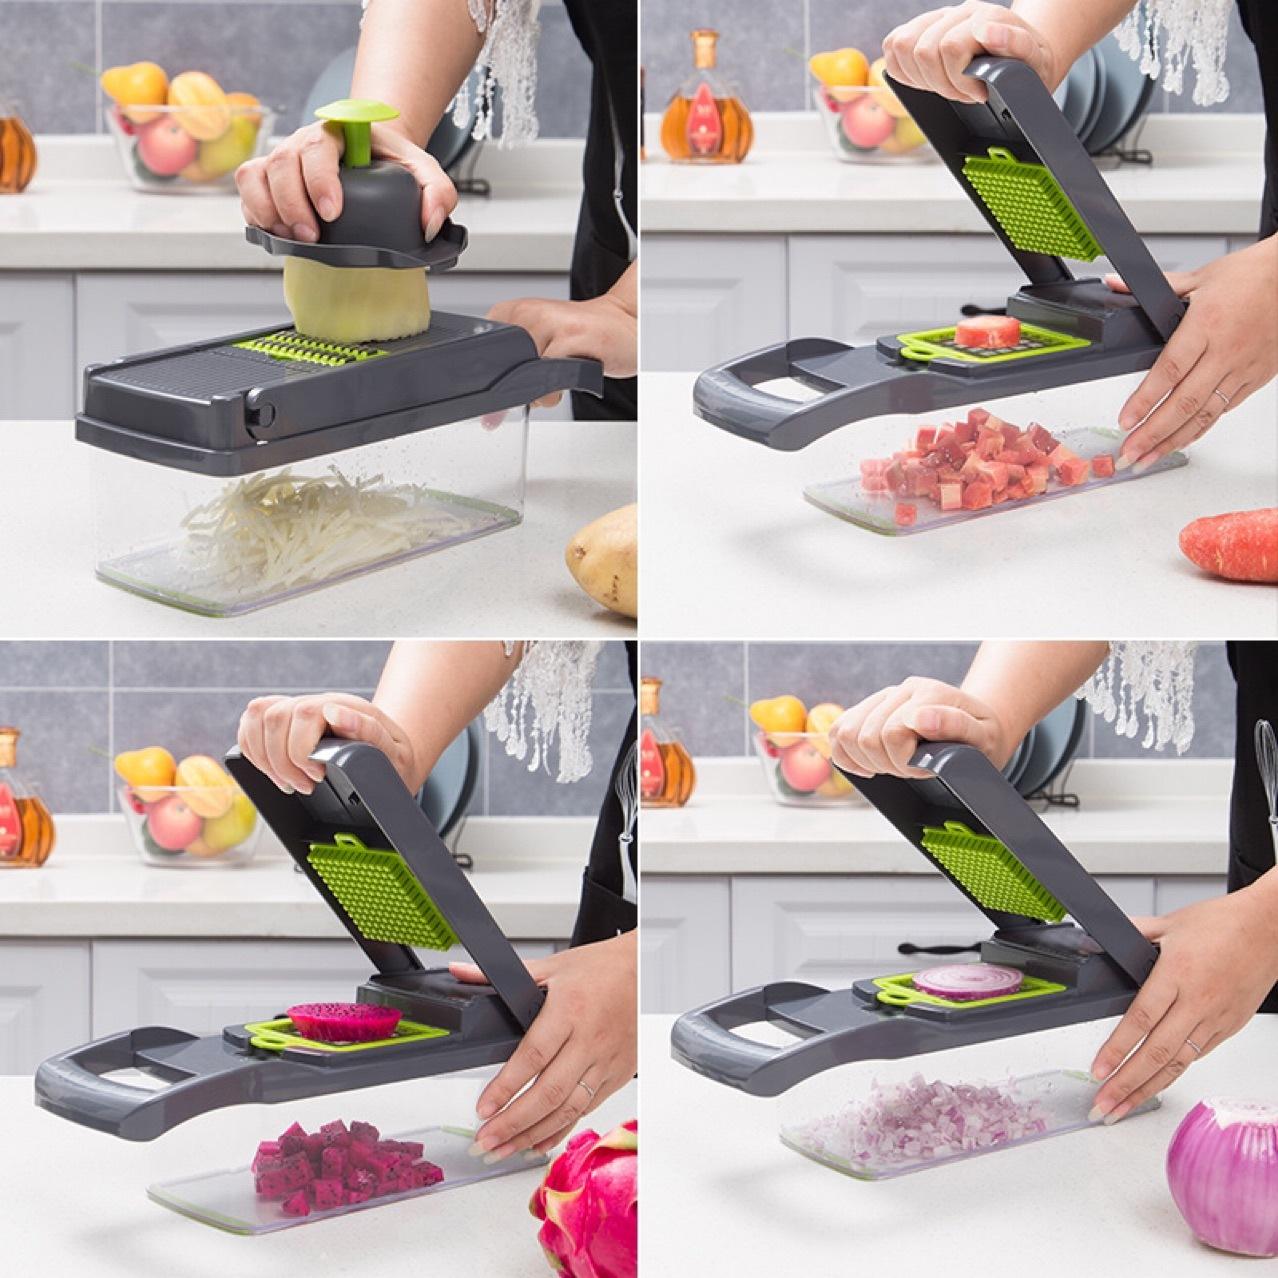 12 In 1 Manual Vegetable and Onion Chopper